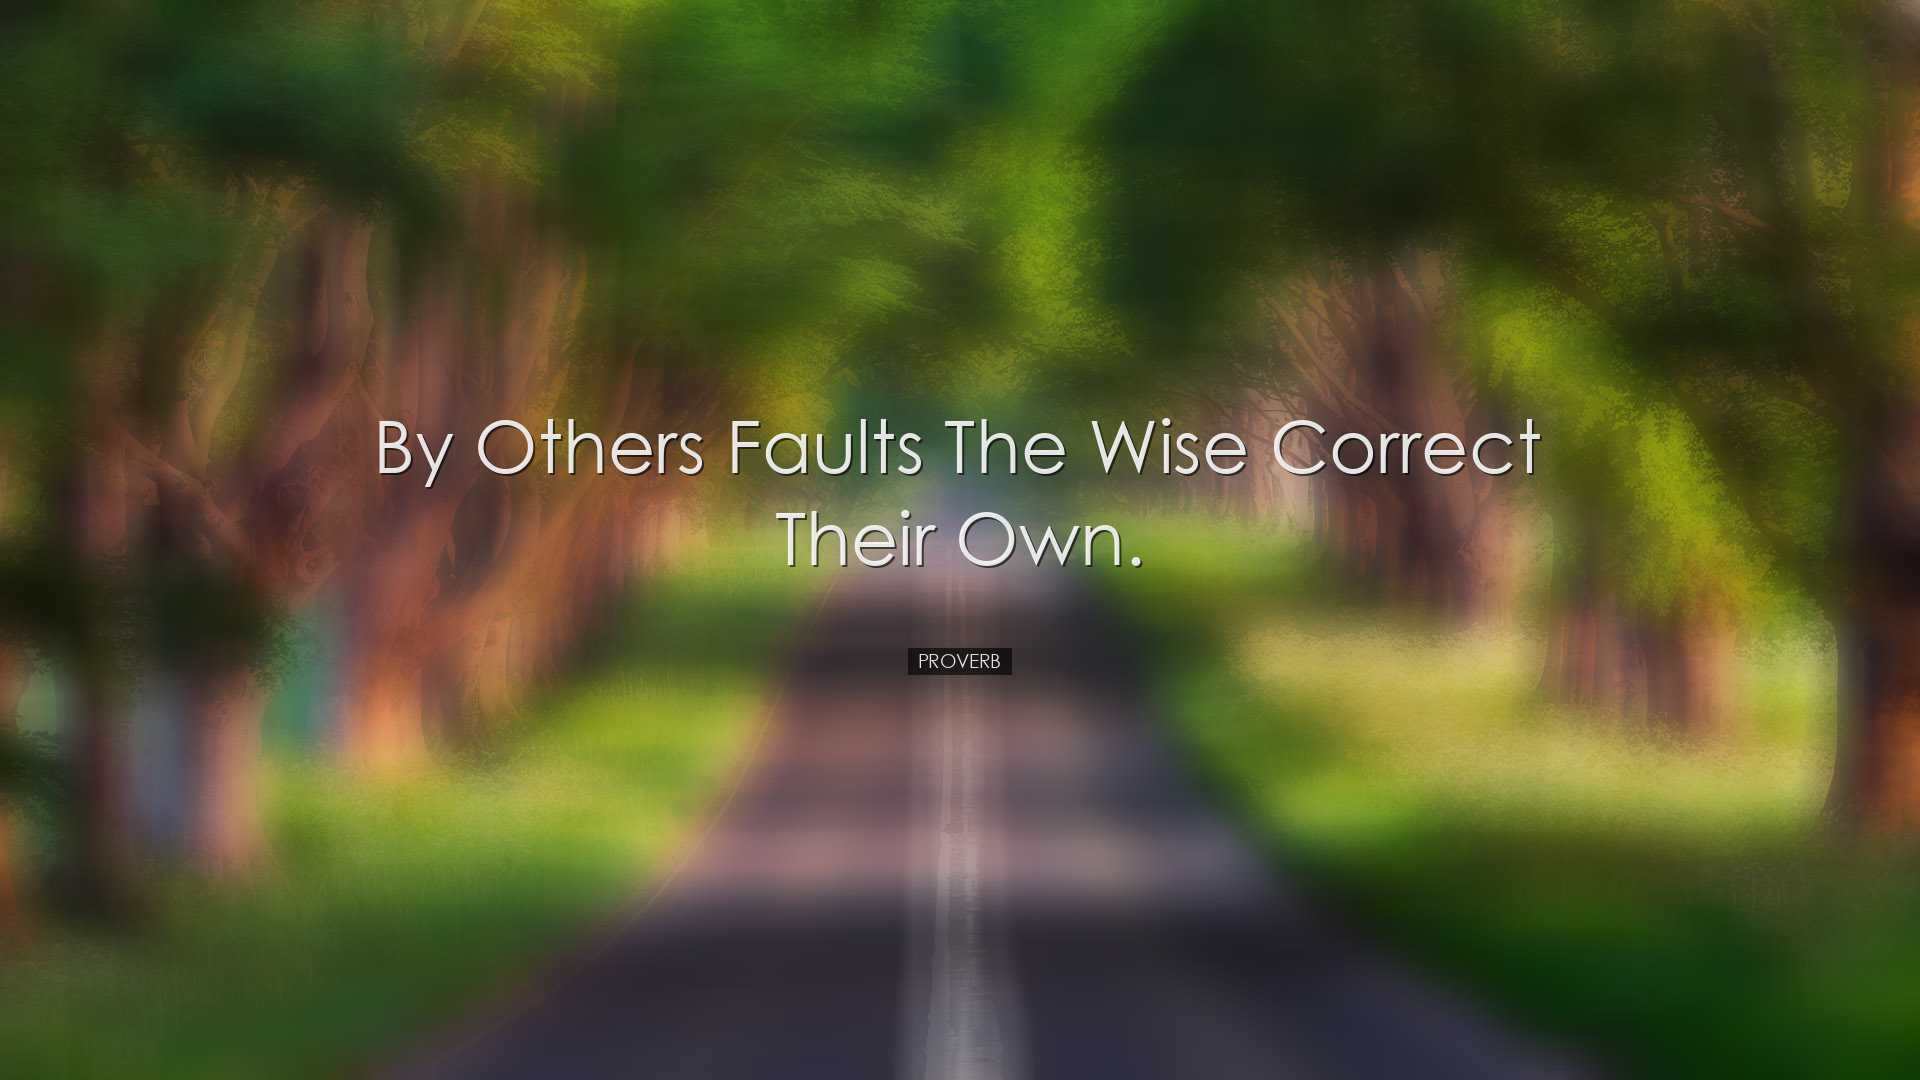 By others faults the wise correct their own. - Proverb